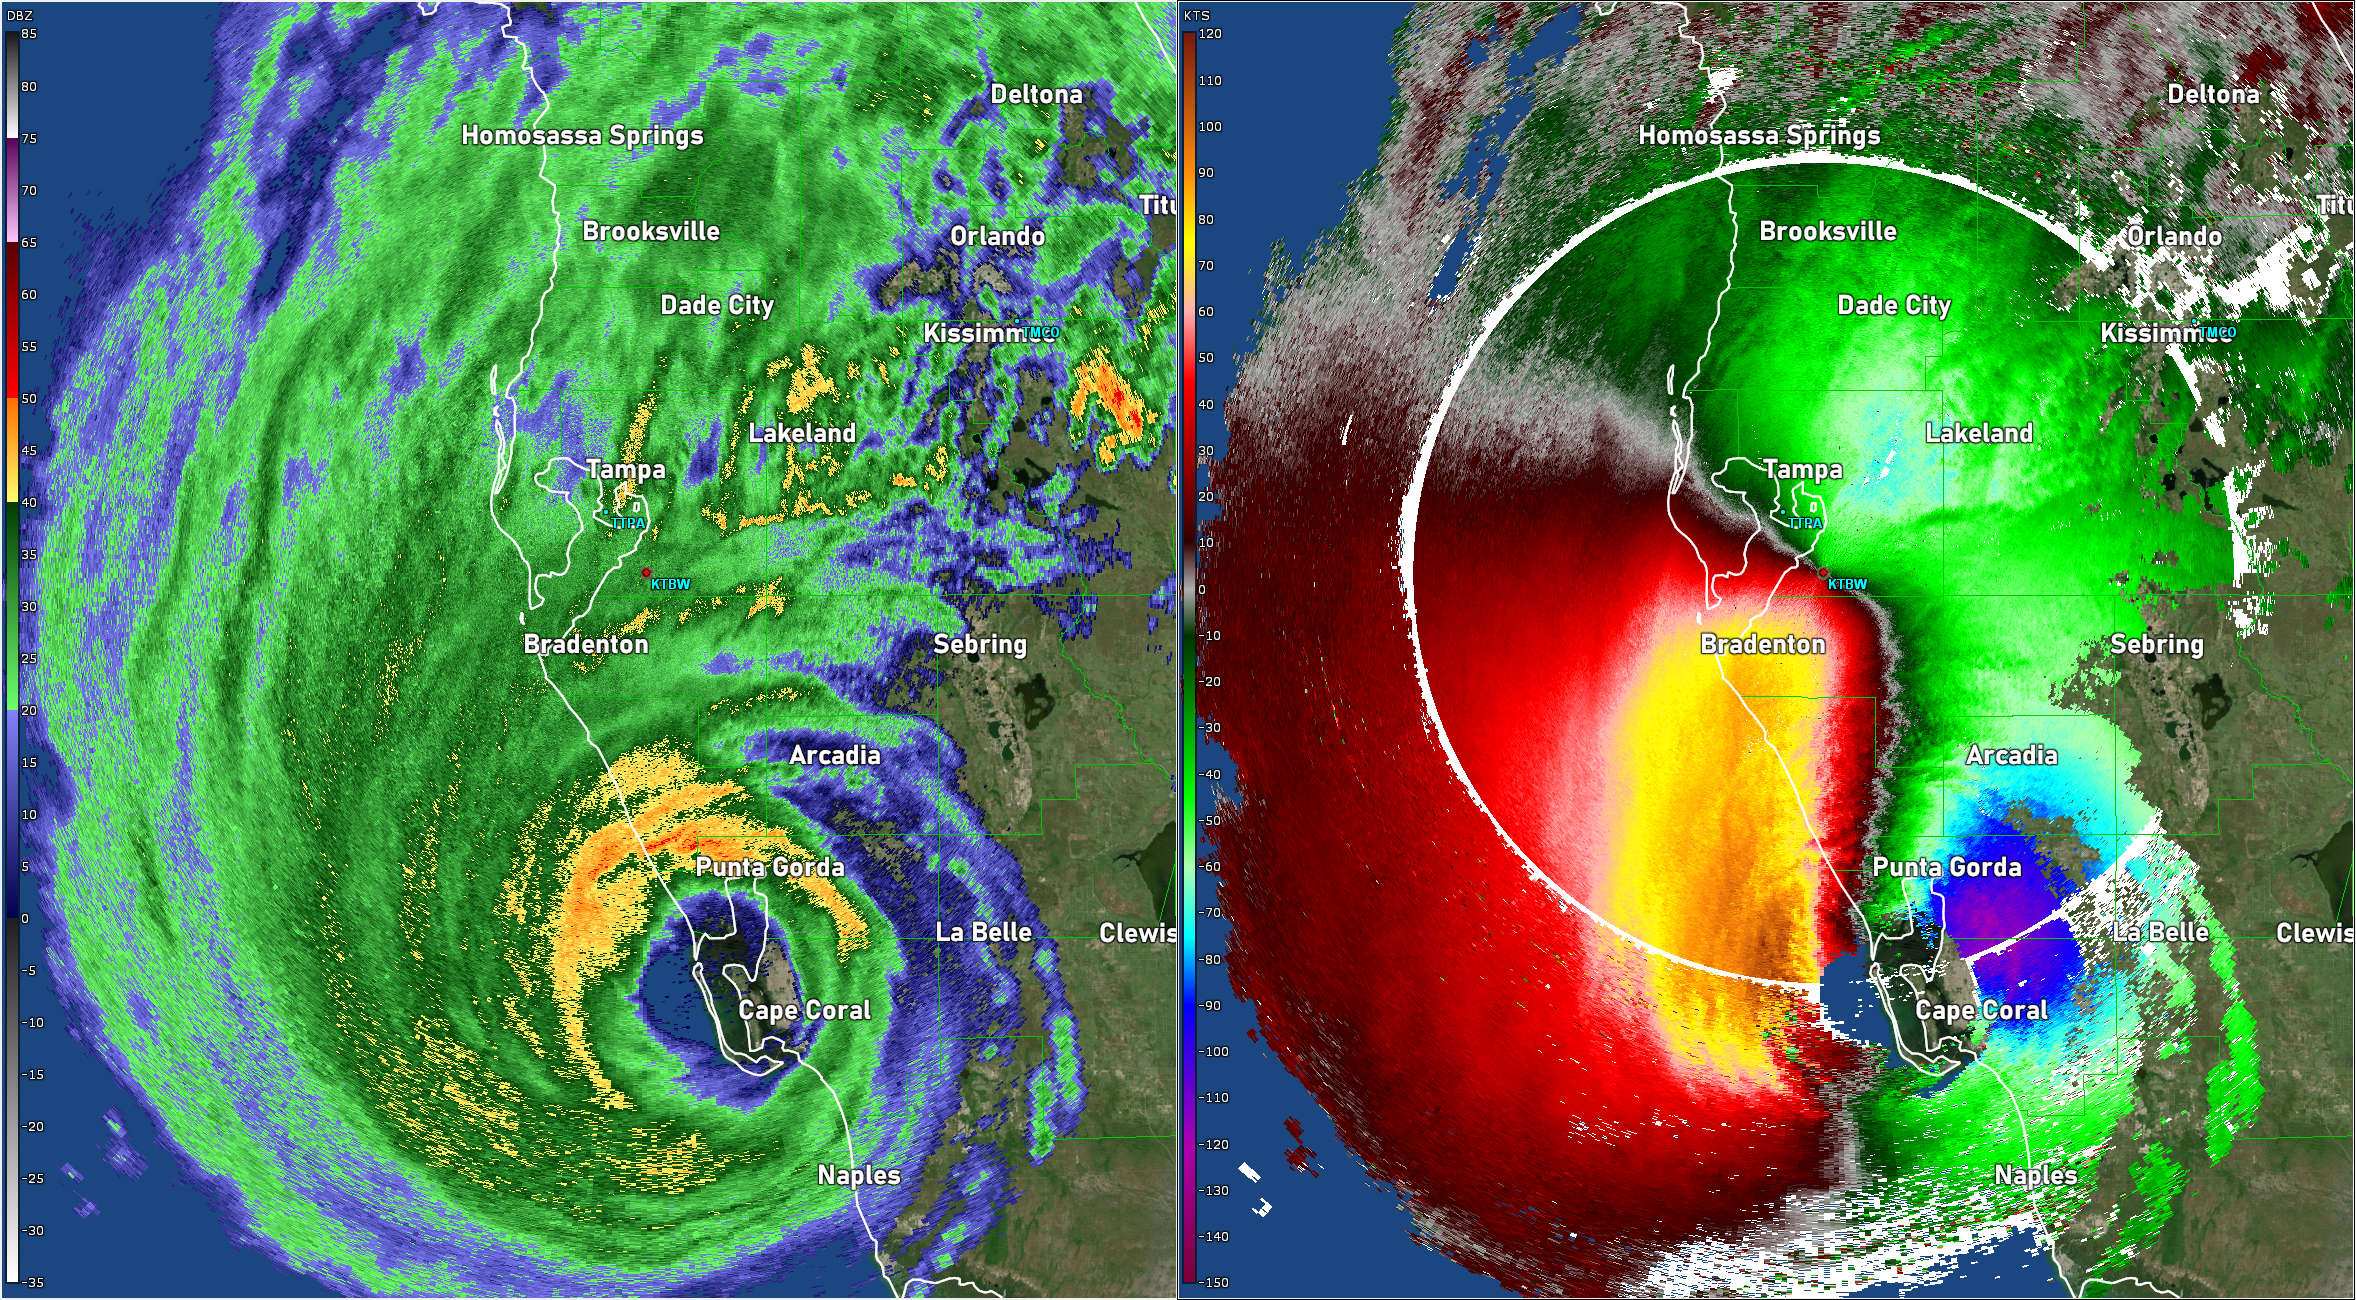 Reflectivity (left) and velocity (right) of landfalling Hurricane Ian sampled by the Tampa Bay, FL WSR-88D scanning in VCP 112 on September 28, 2022. 